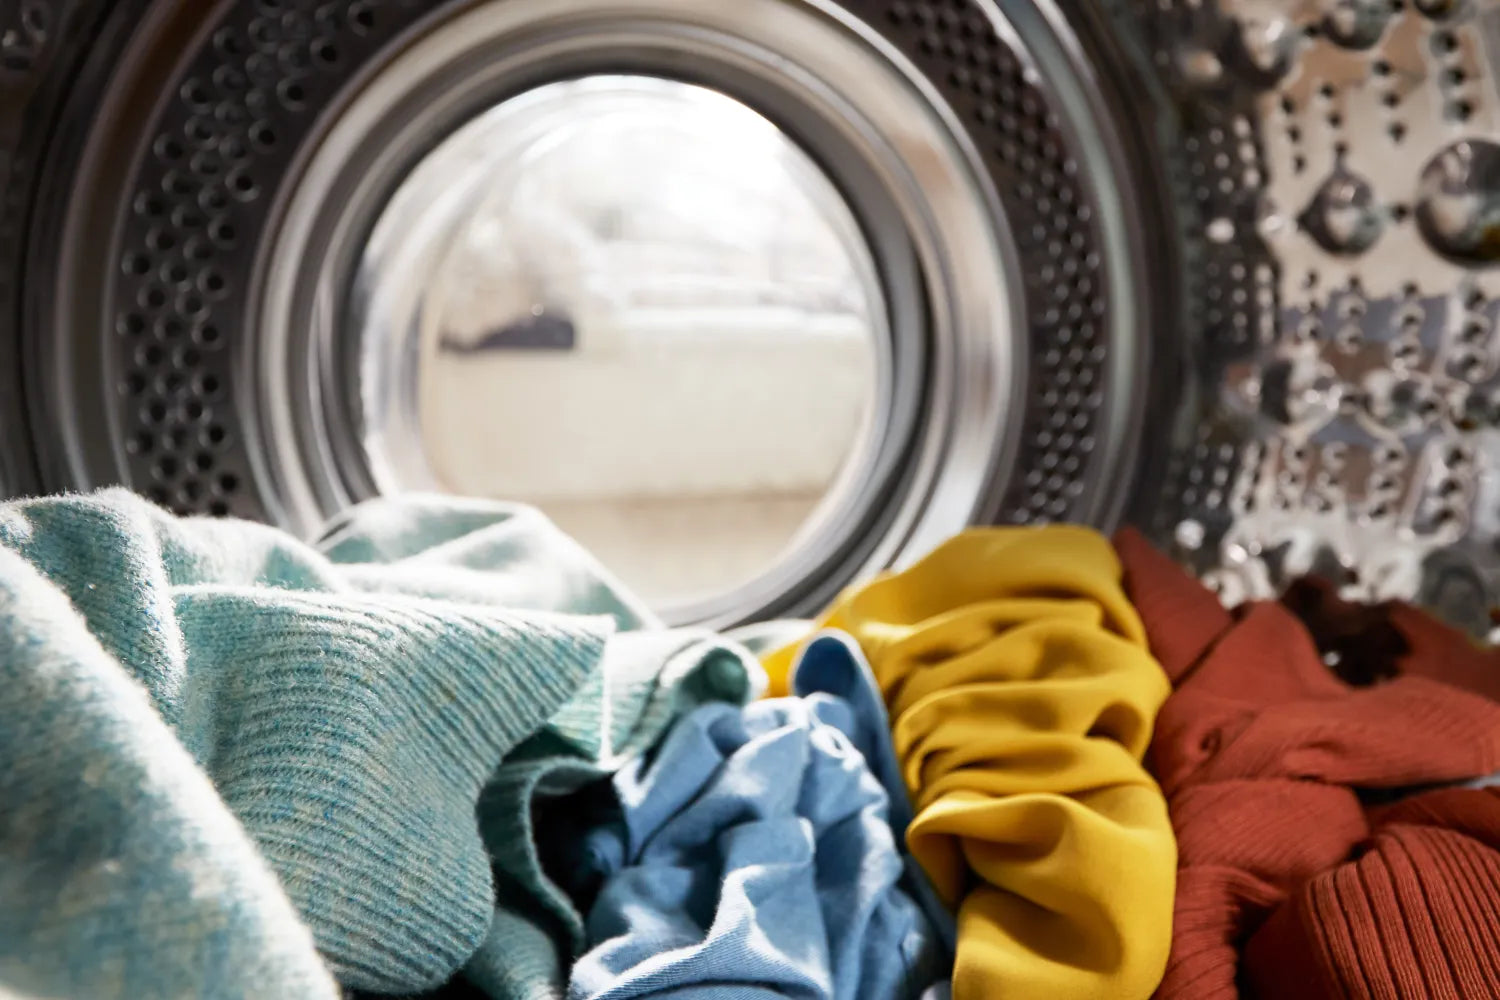 How To Do Laundry in 8 Quick and Easy Steps